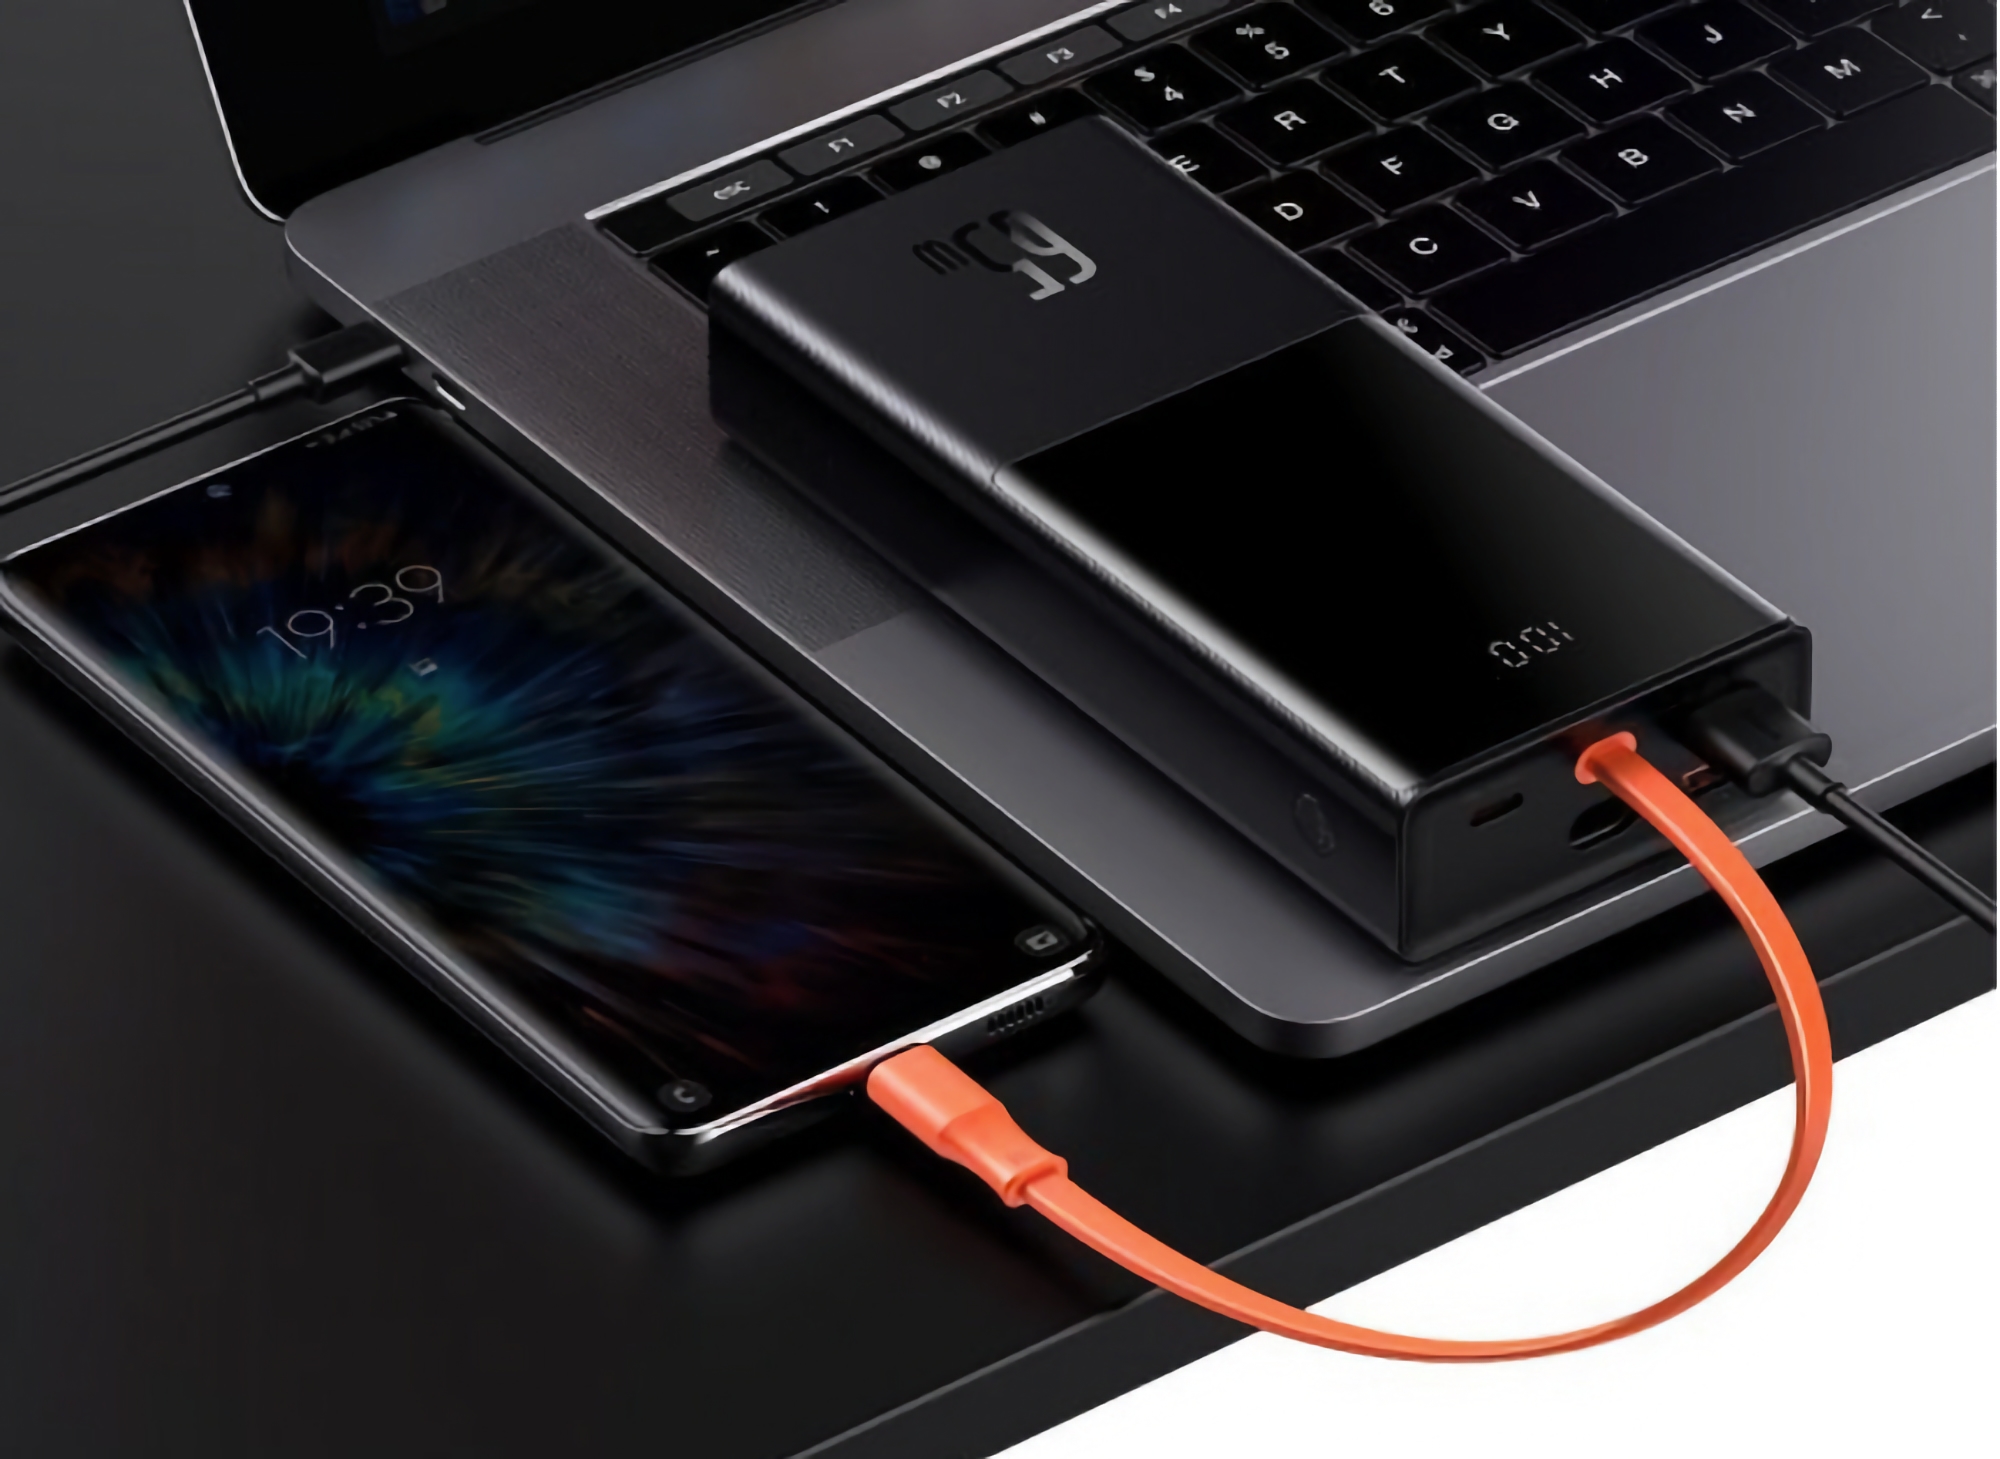 Baseus Elf Digital Display: 20,000 mAh battery for iPhone, MacBook and iPad with built-in USB-C cable, 65-watt charger and display for $55